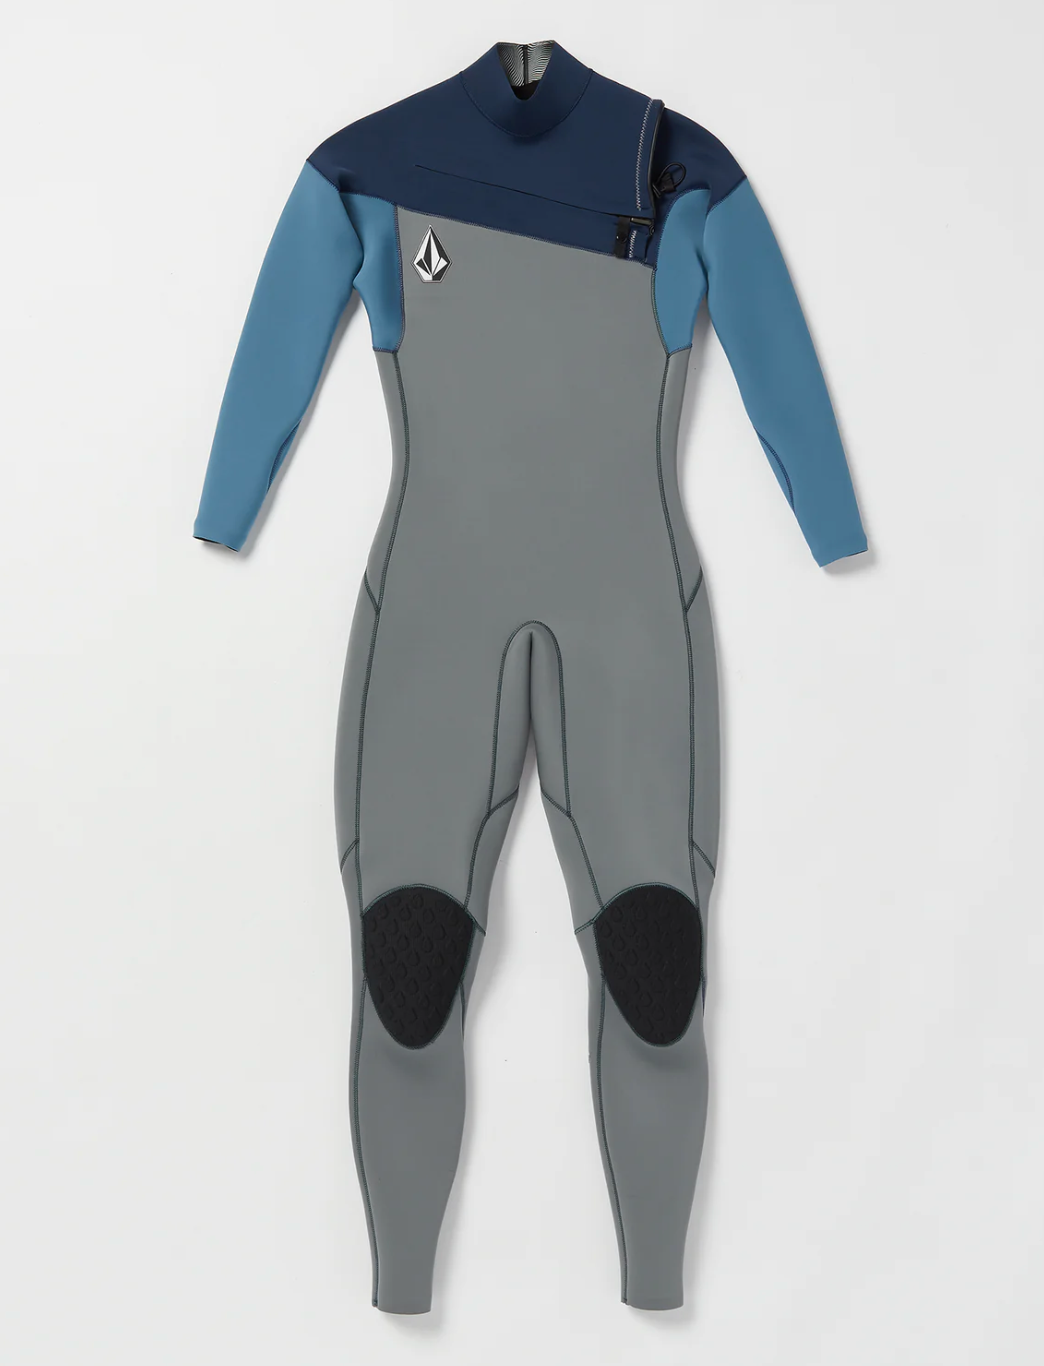 This 4/3mm premium chest zip wetsuit has been designed and tested in the harshest conditions. It features an internal rapid-dry thermal lining for ultimate warmth and comfort. The entire wetsuit is made from the highest grade limestone-based neoprene. All seams are glued, taped and blind stitched for maximum strength and seal. Eco elements included are solvent free water-based glue and Eco Carbon Black neoprene. 